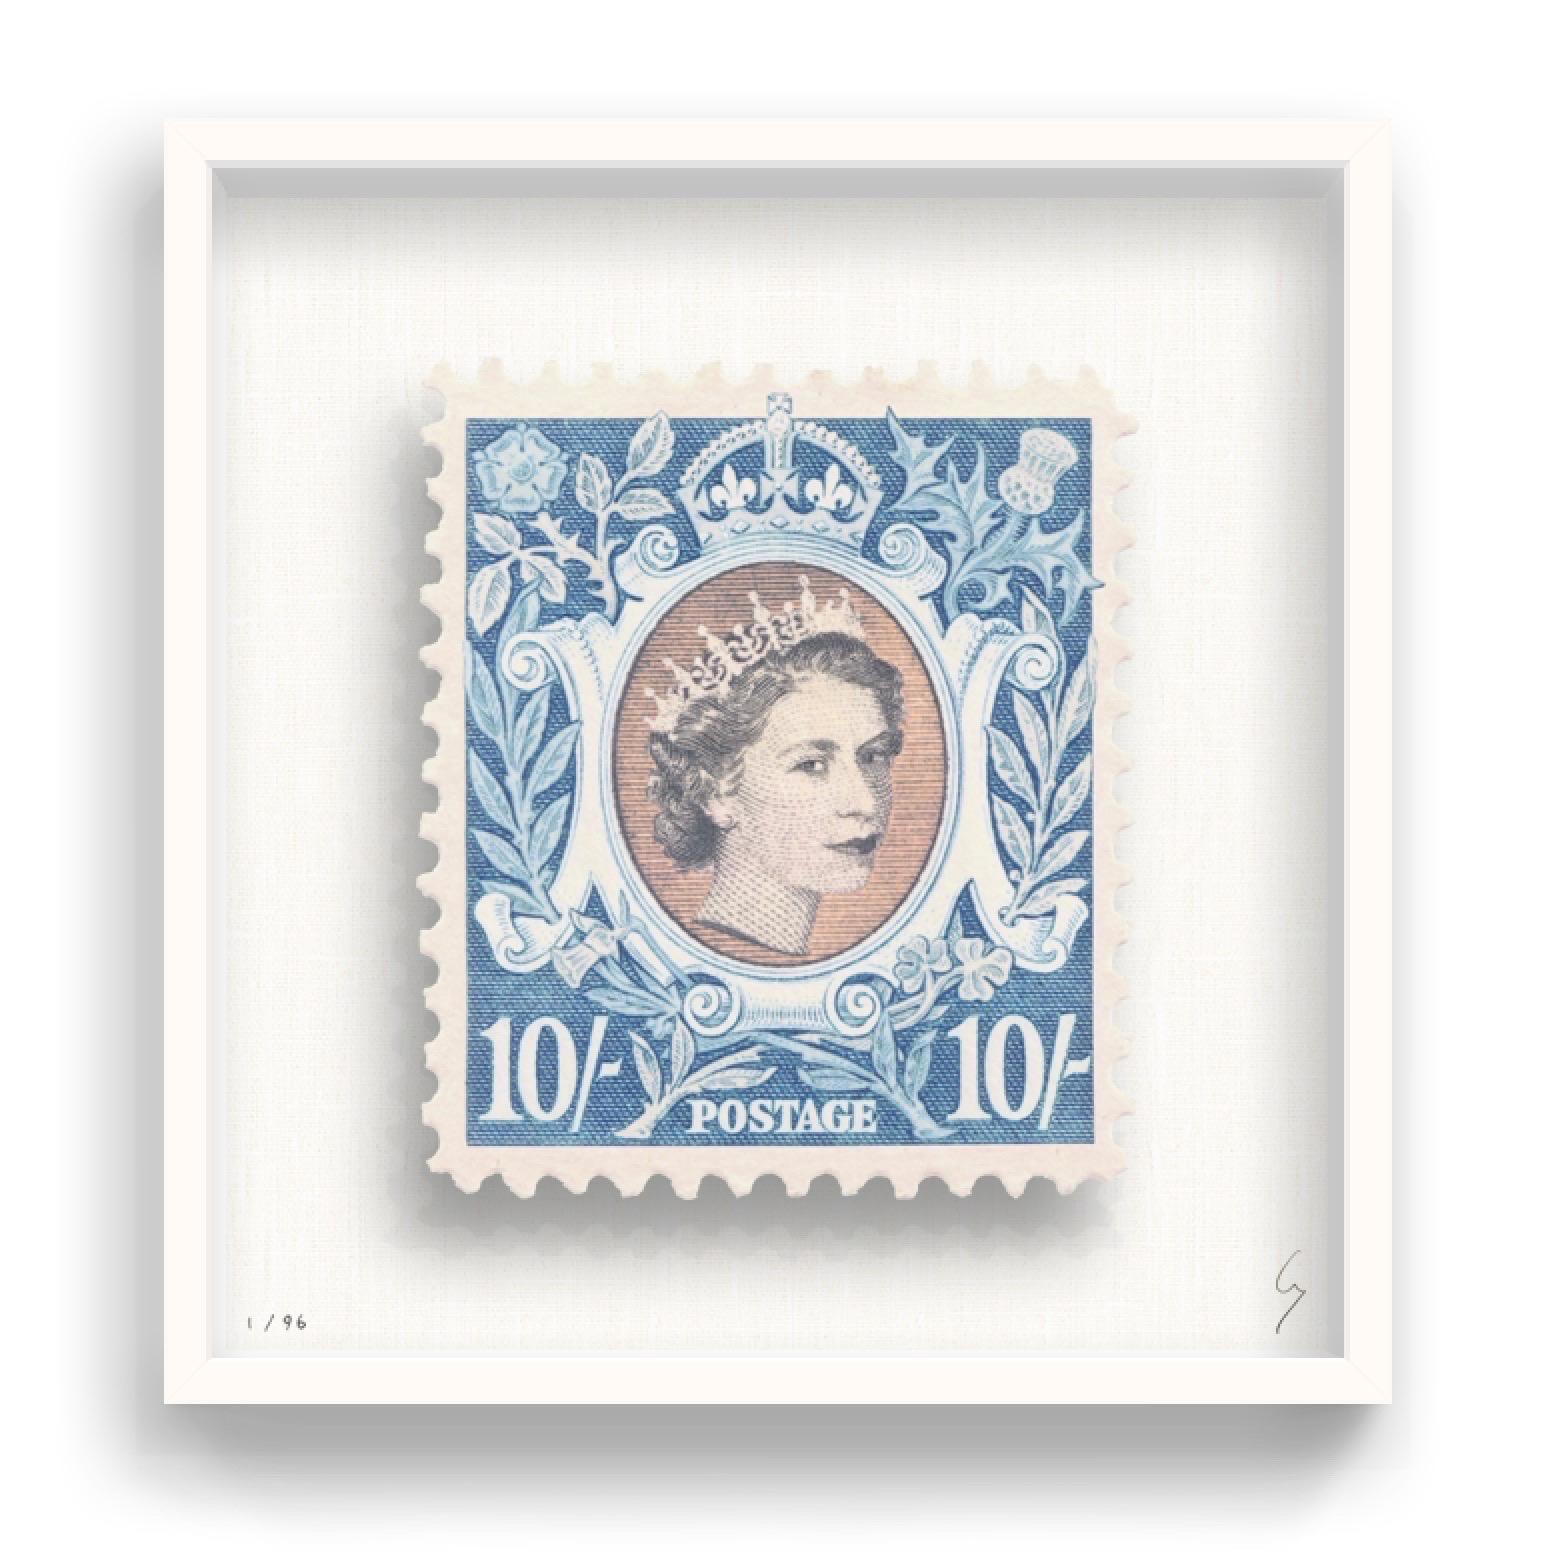 Guy Gee, Queen B (medium)

Hand-engraved print on 350gsm on G.F Smith card
53 x 56 cm (20 4/5 x 22 2/5 in)
Frame included 
Edition of 96

Each artwork by Guy had been digitally reimagined from an original postage stamp. Cut out and finished by hand,